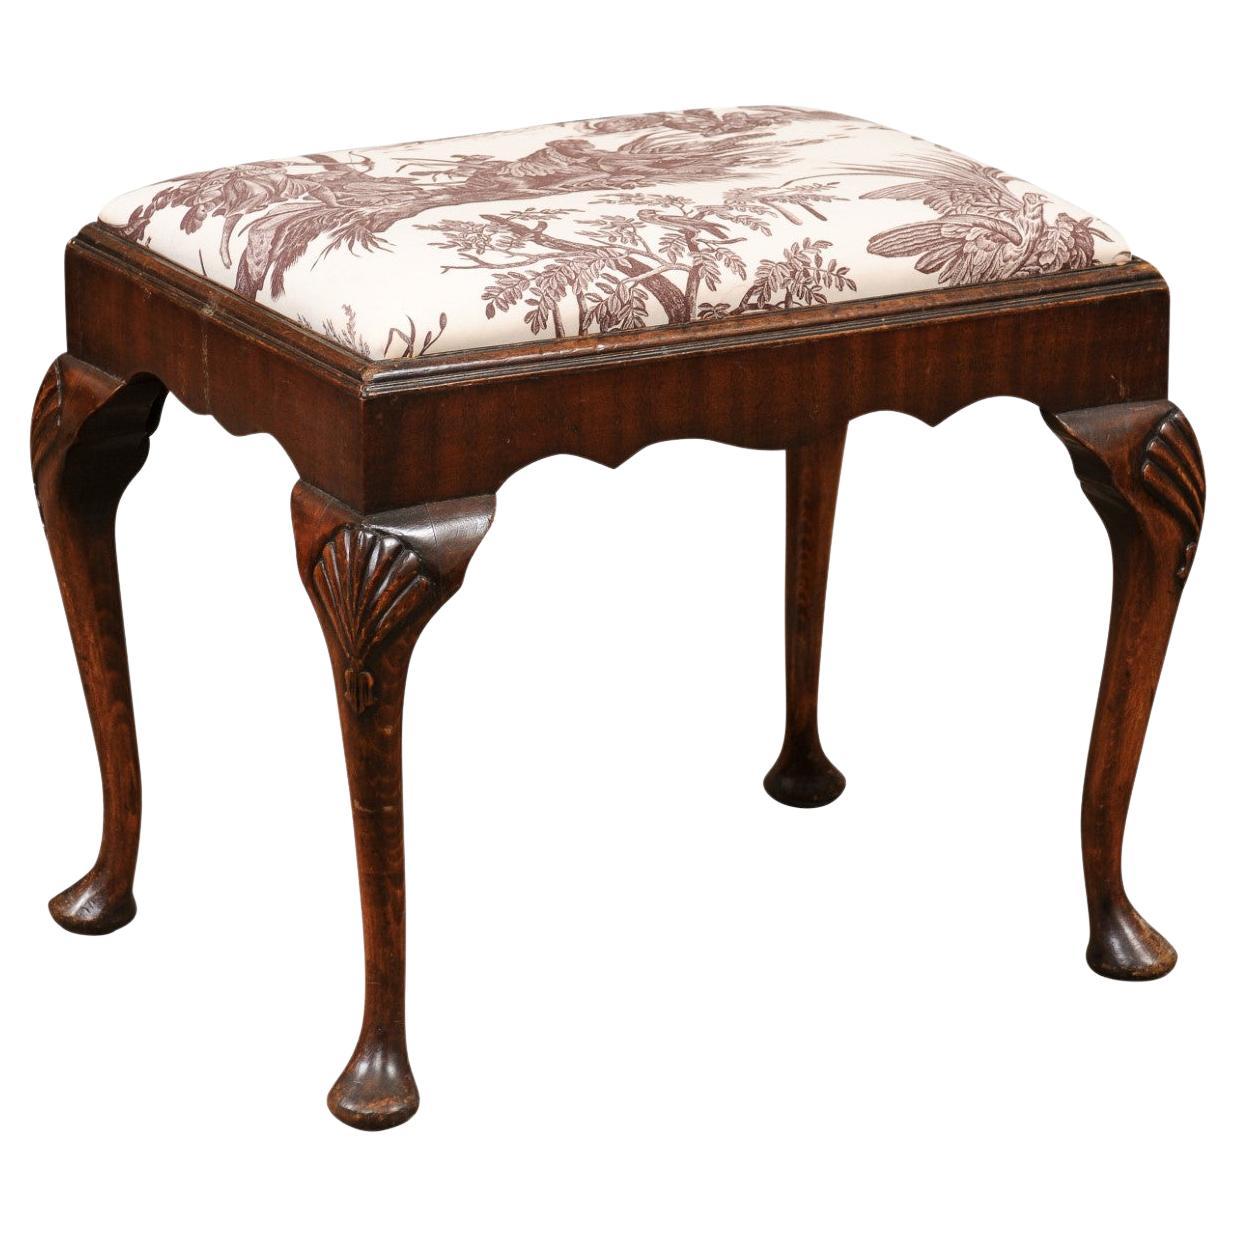 English Queen Anne Style Walnut Stool with Slip Seat, Early 20th Century